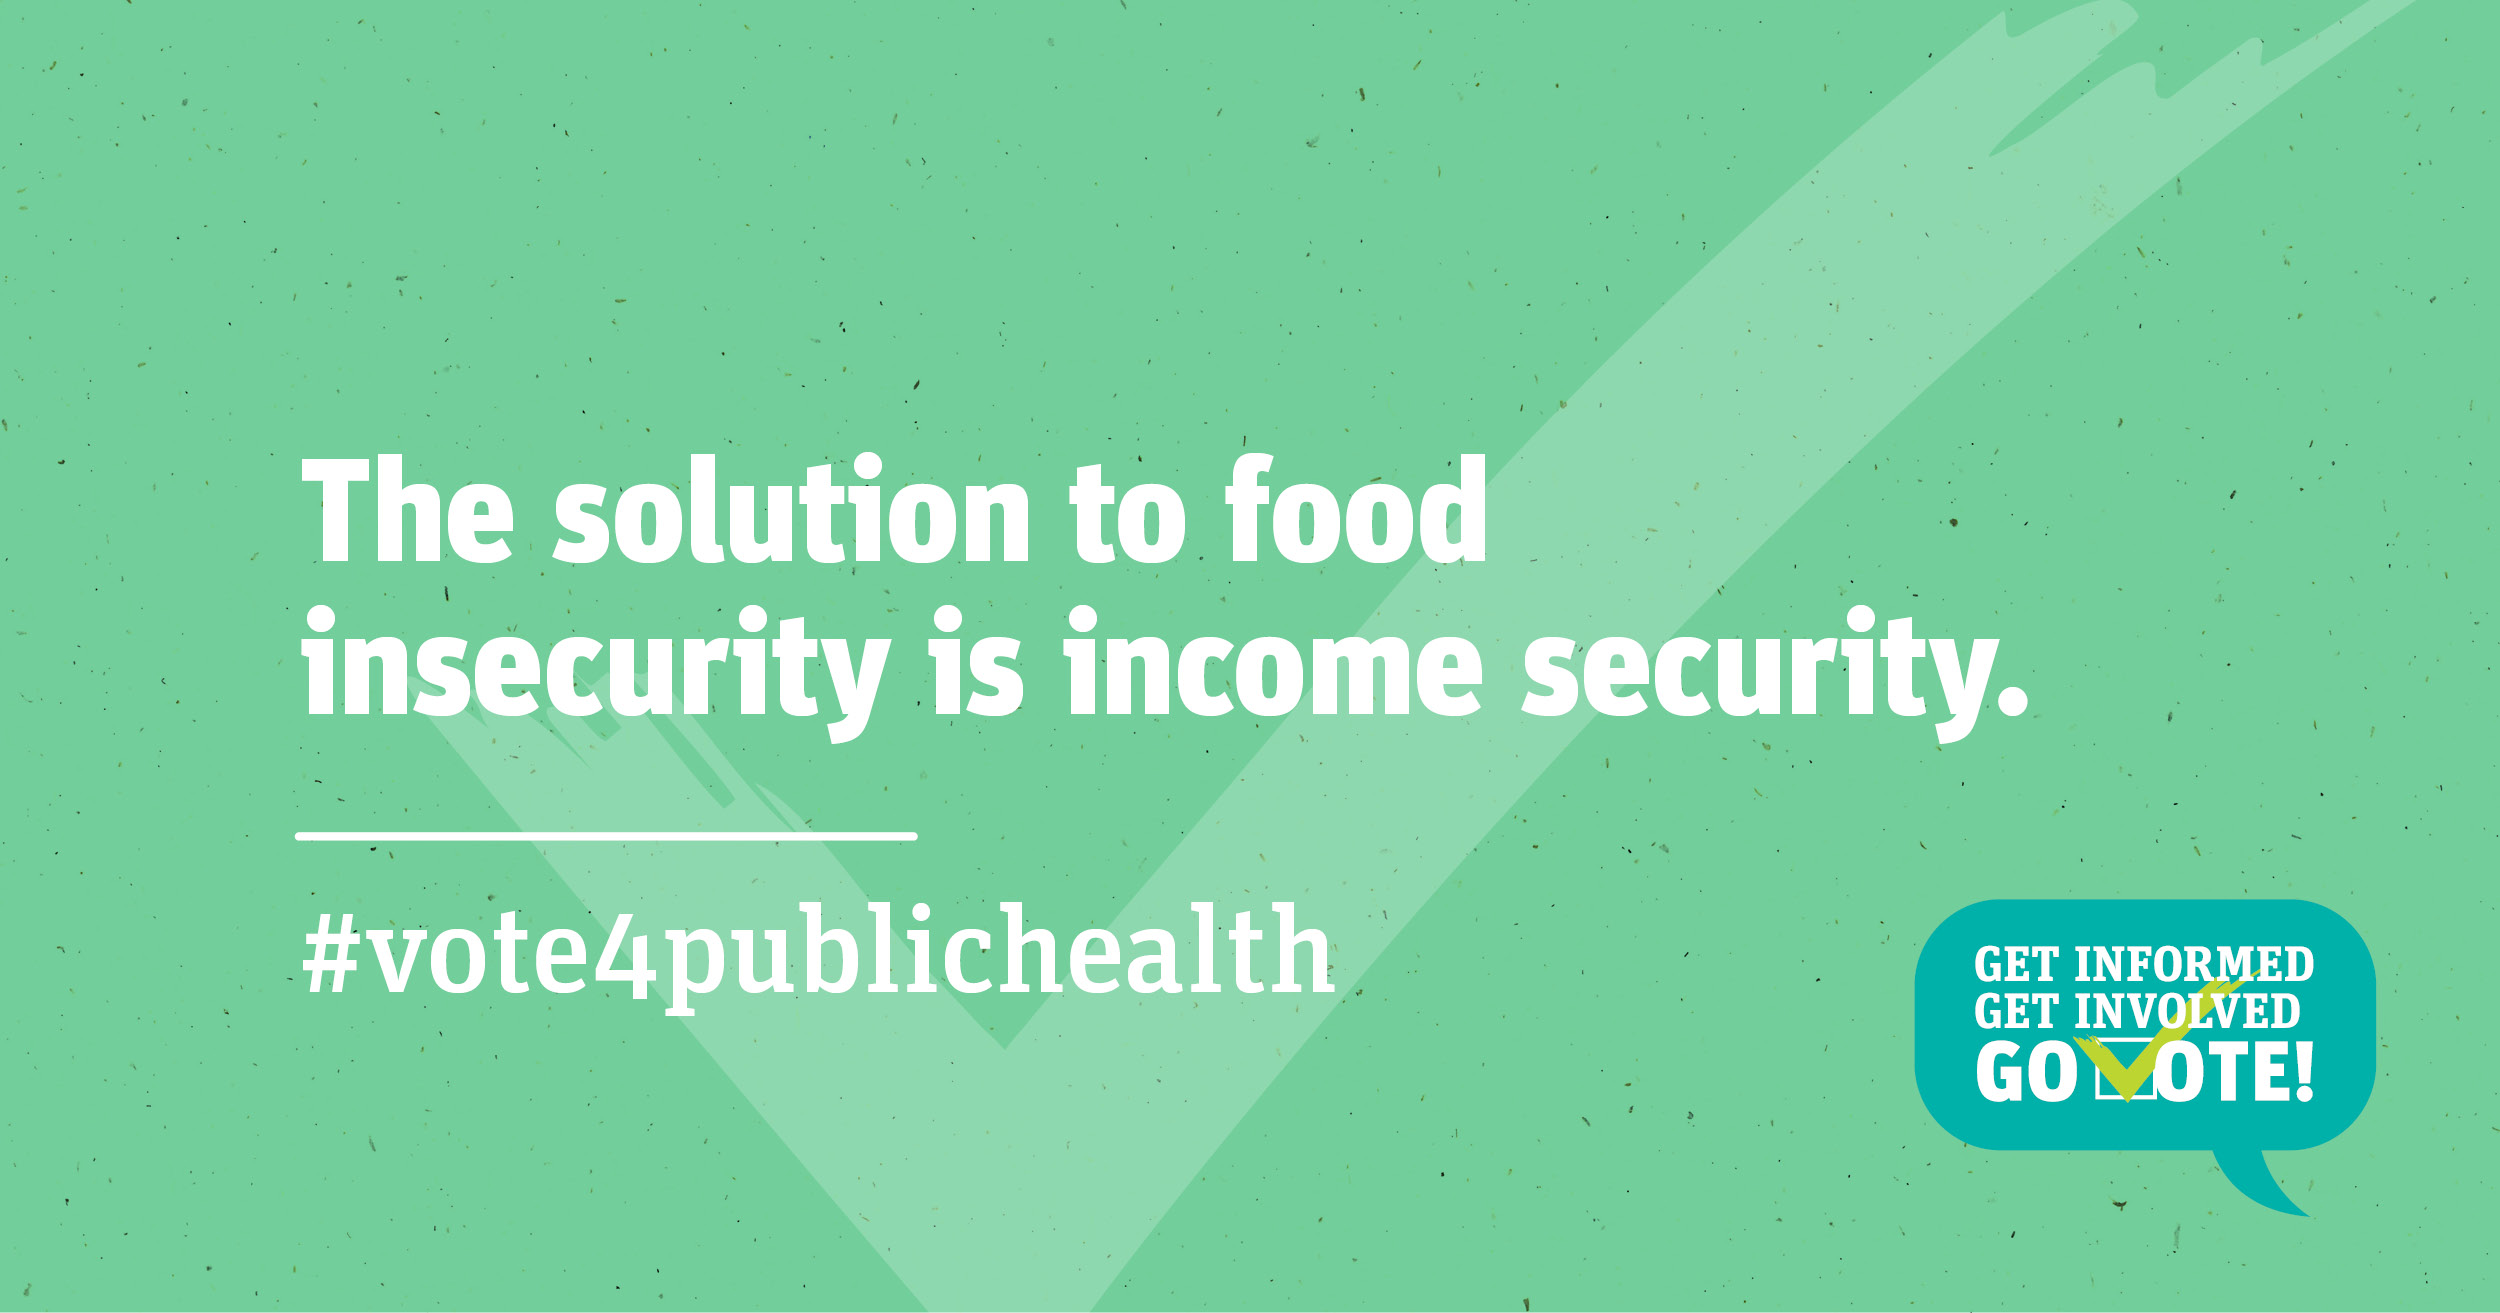 The solution to food insecurity is income security.